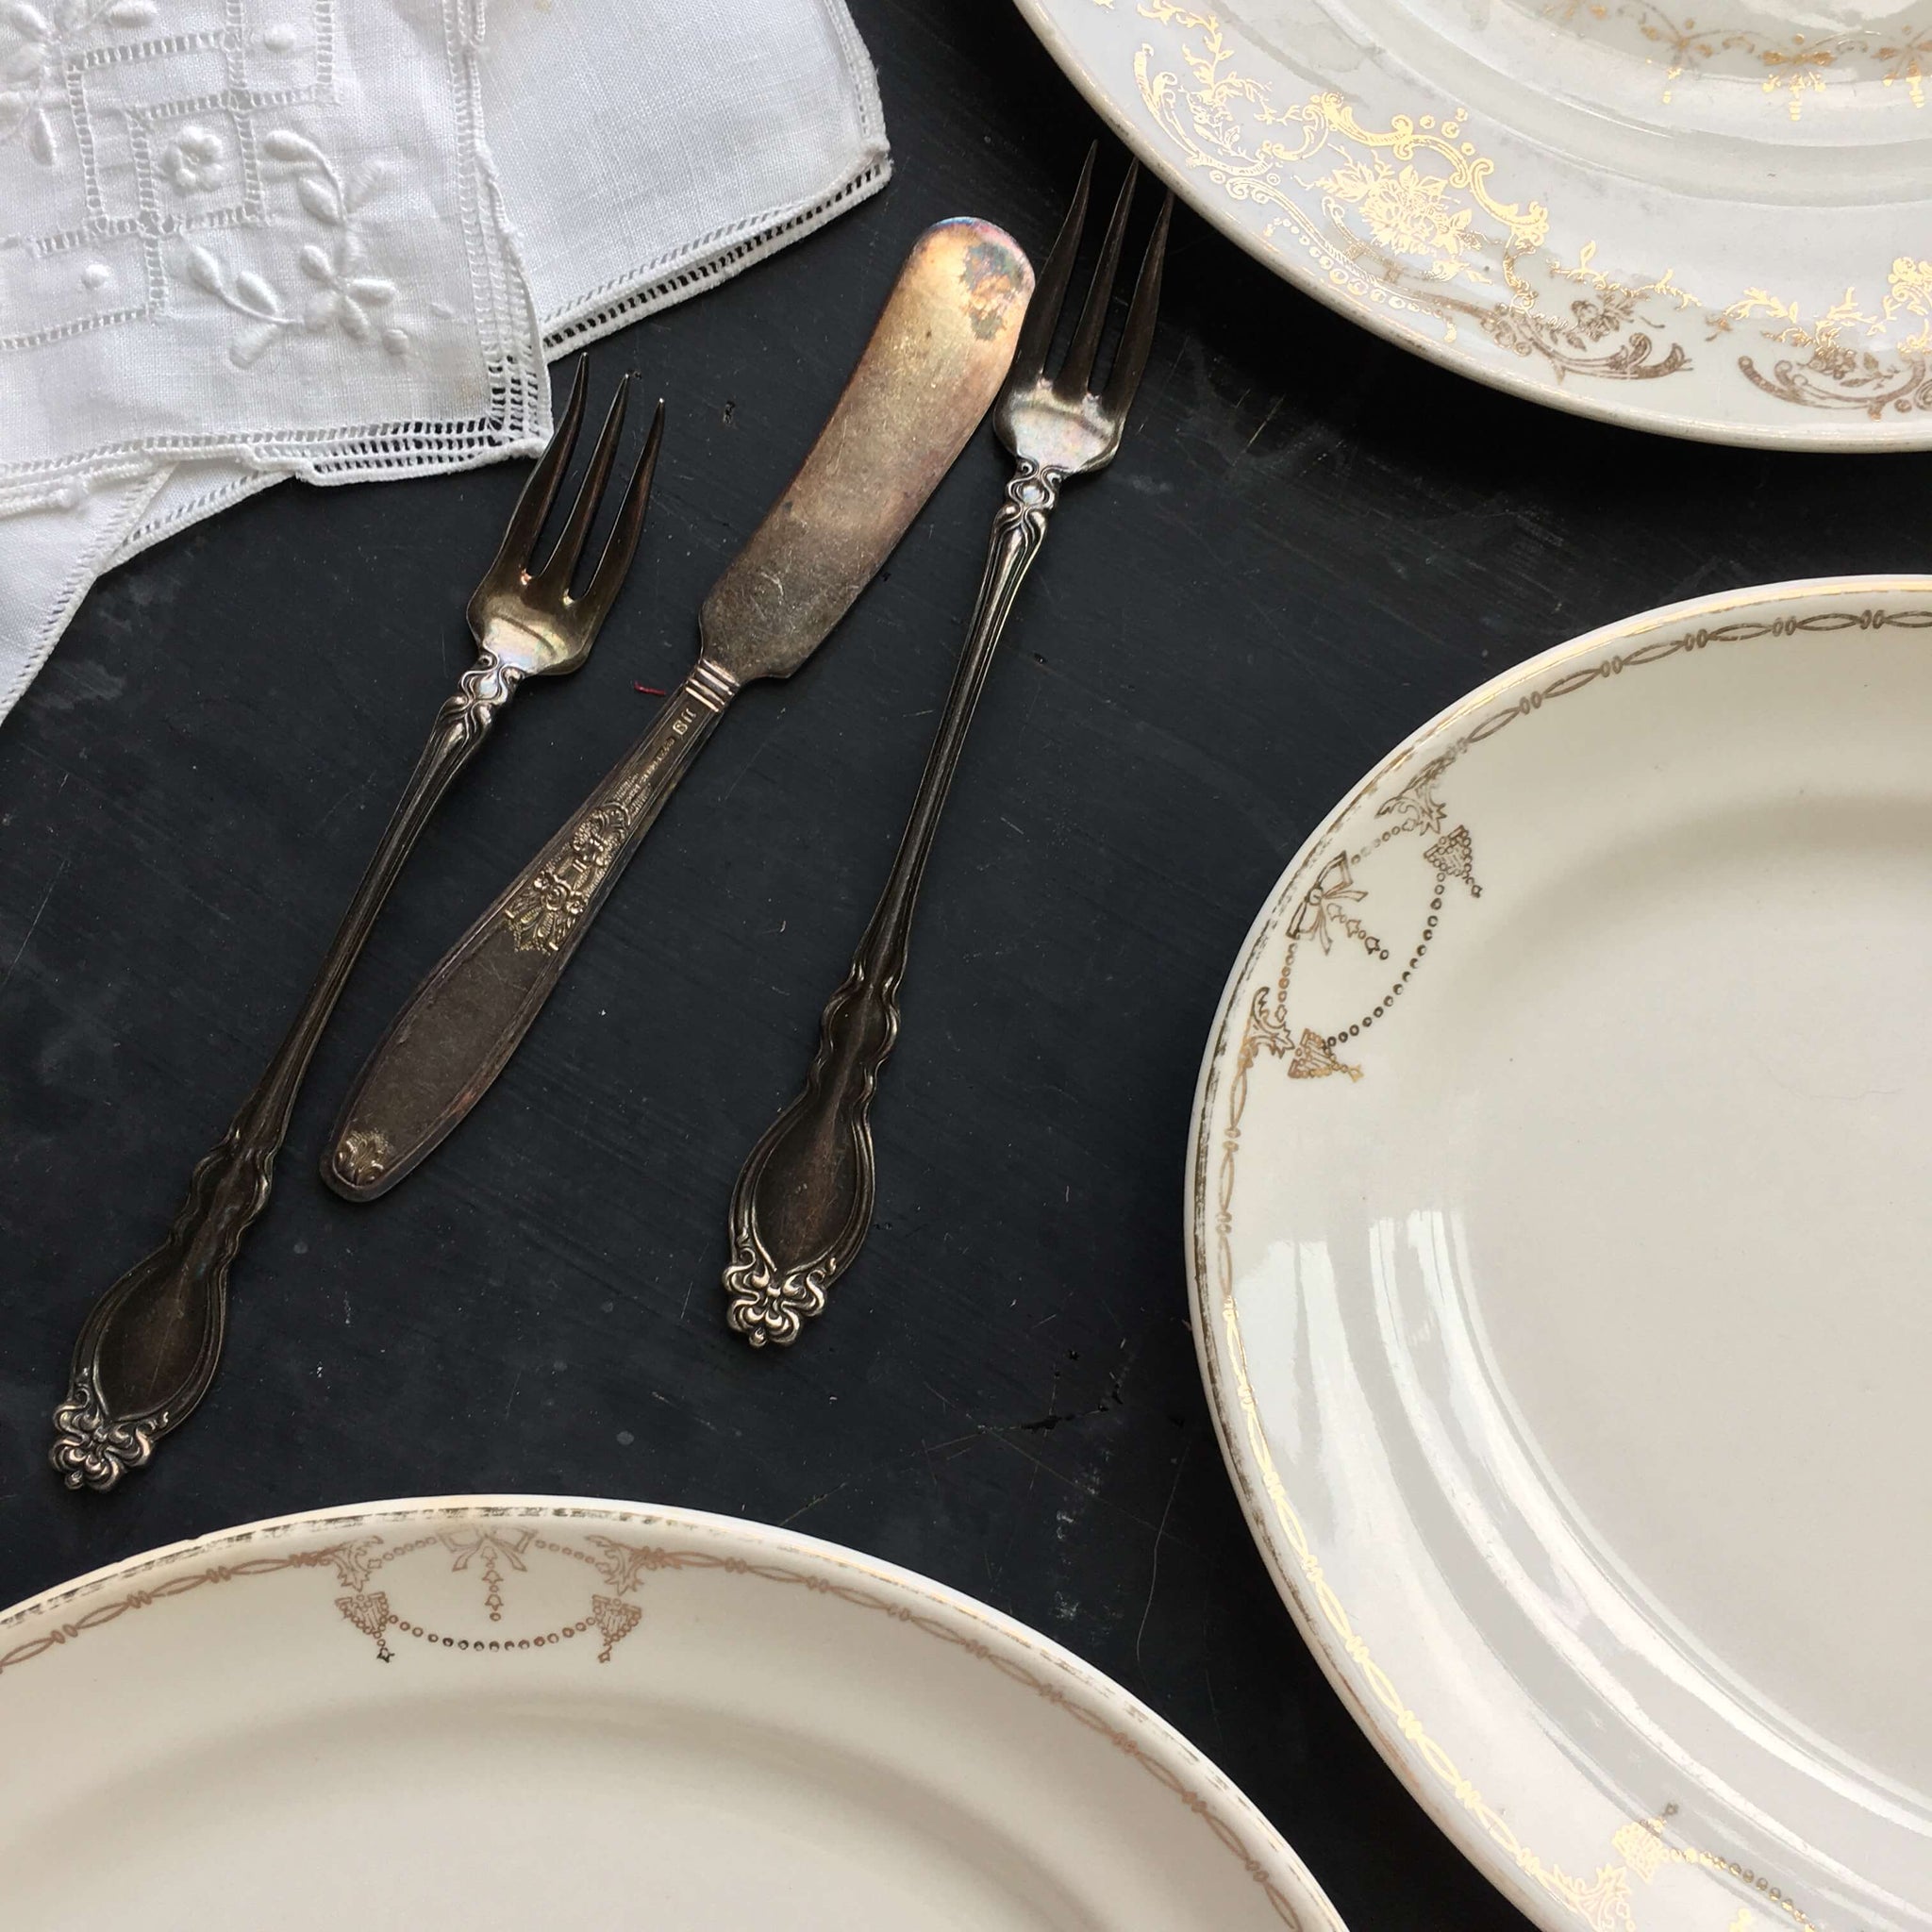 Vintage 1940s Commodore by Salem Relish Dishes - 23 Karat Gold - Set of Two